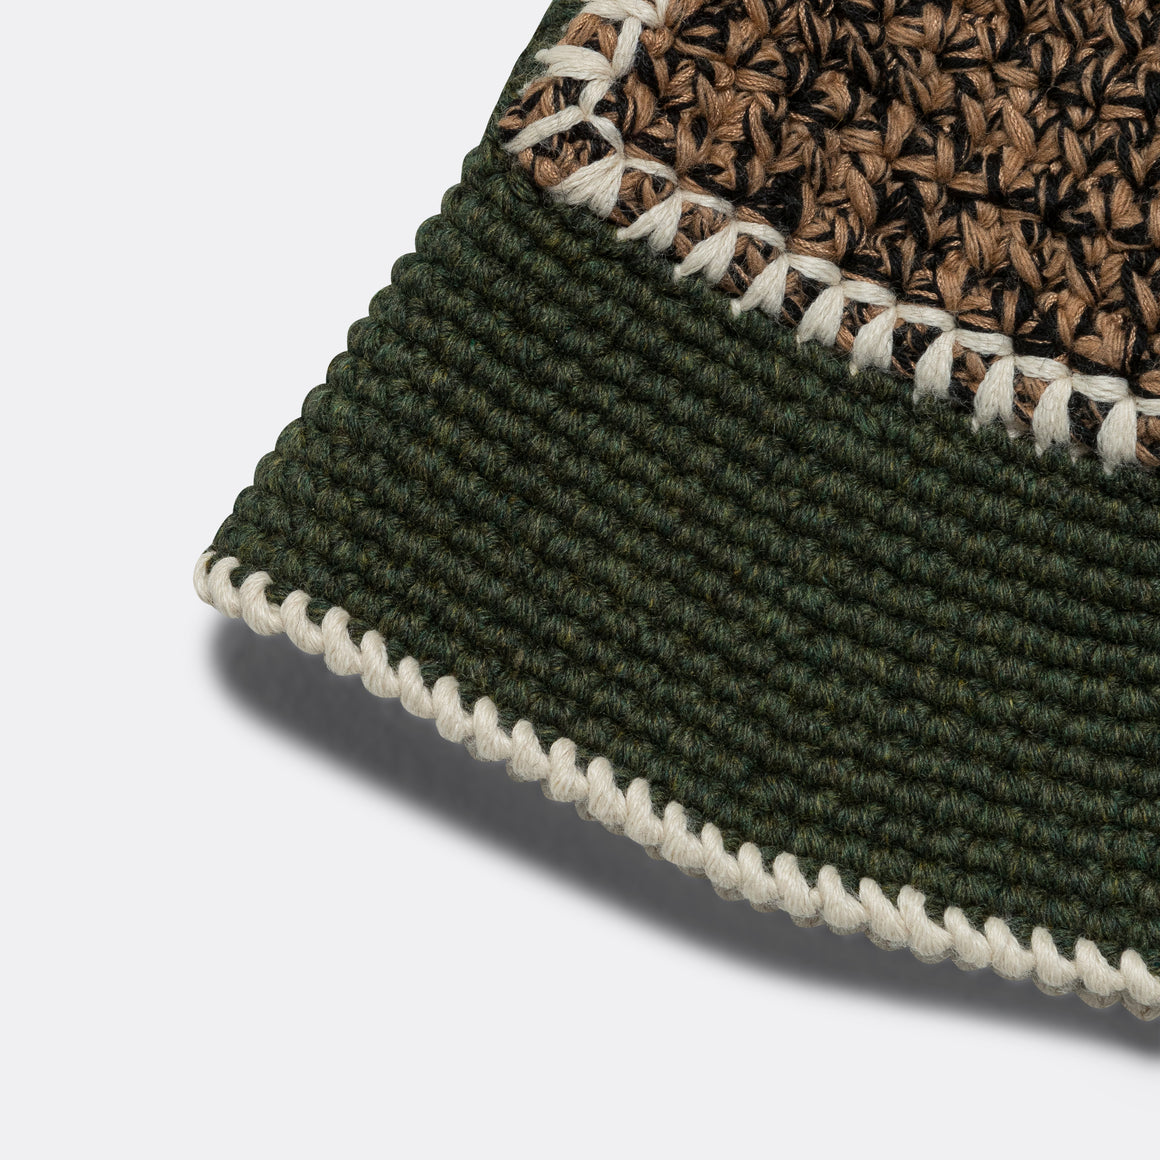 Nicholas Daley - Hand Crochet Bucket Hat - Black/Olive/Sand - UP THERE